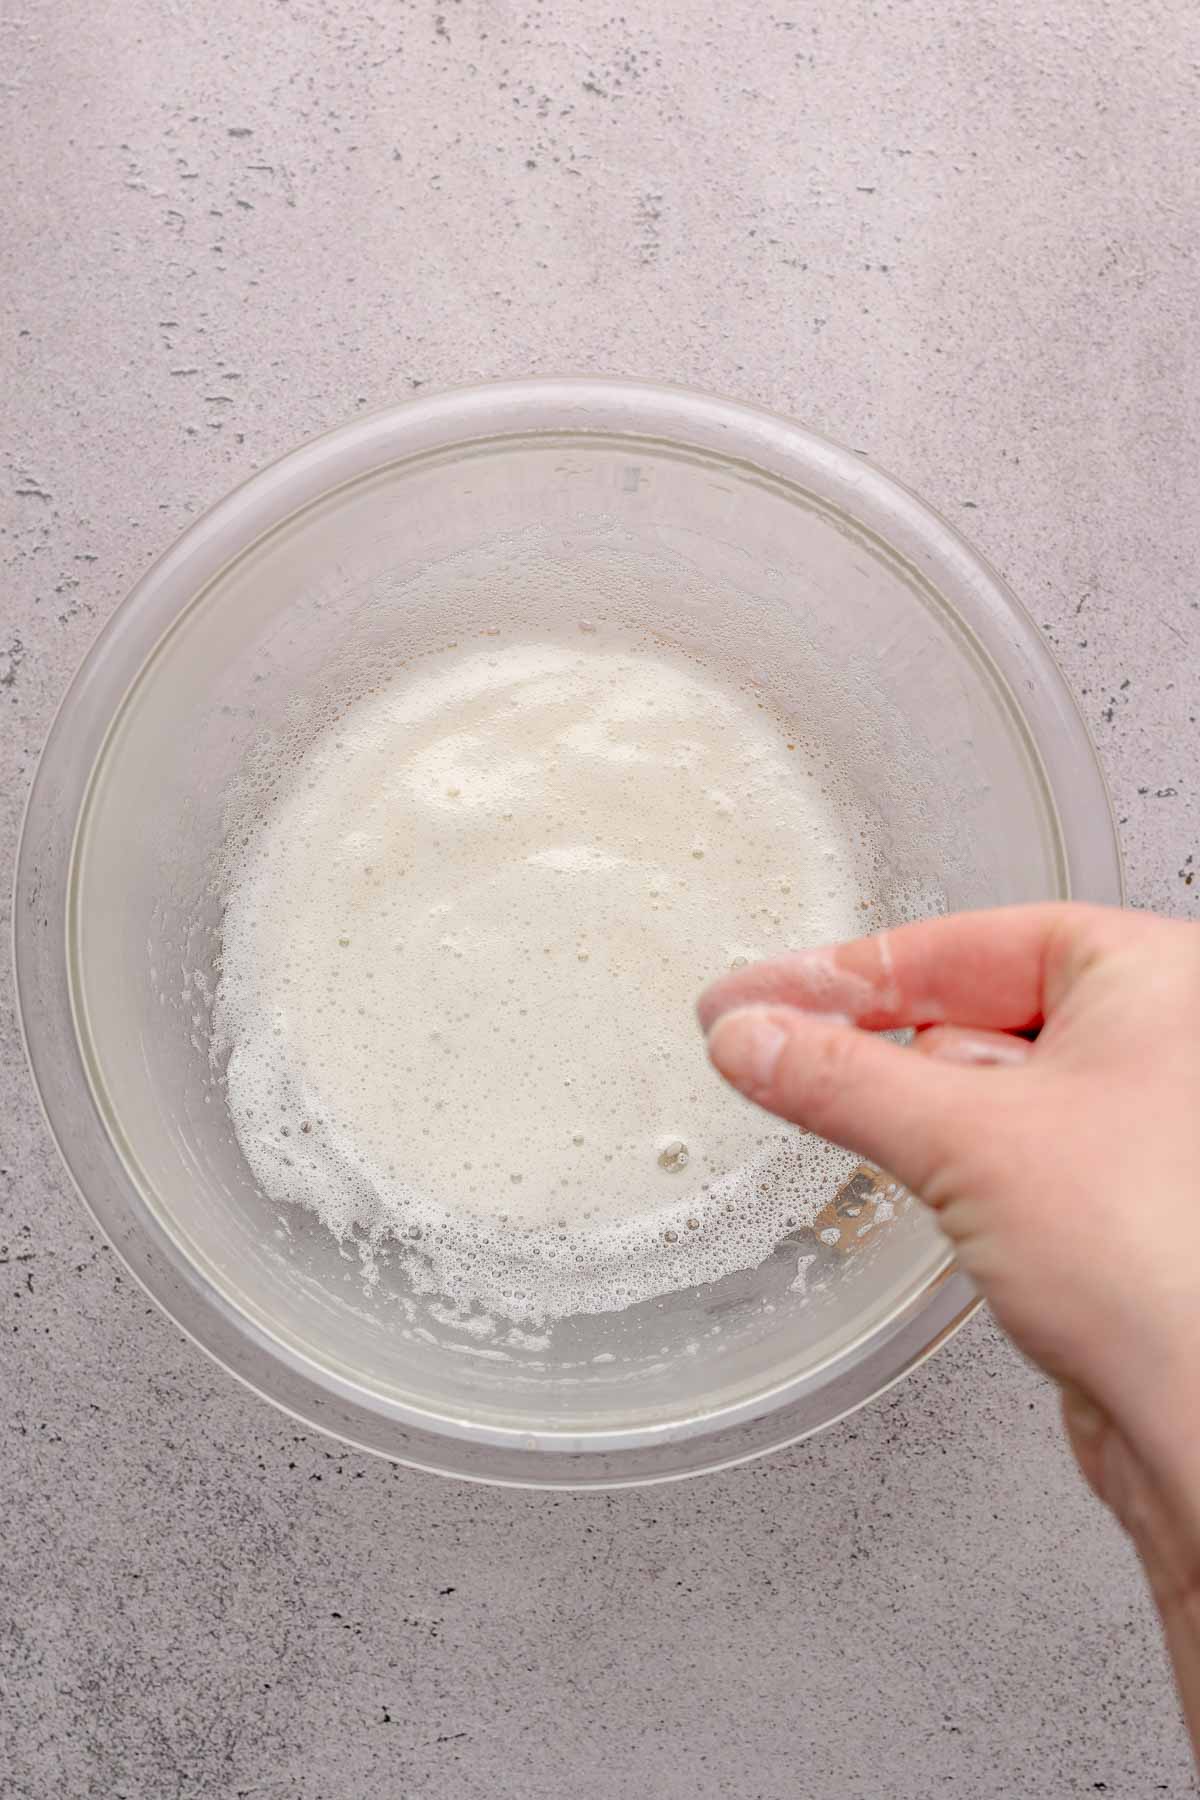 A hand rubs fingers together in egg whites.